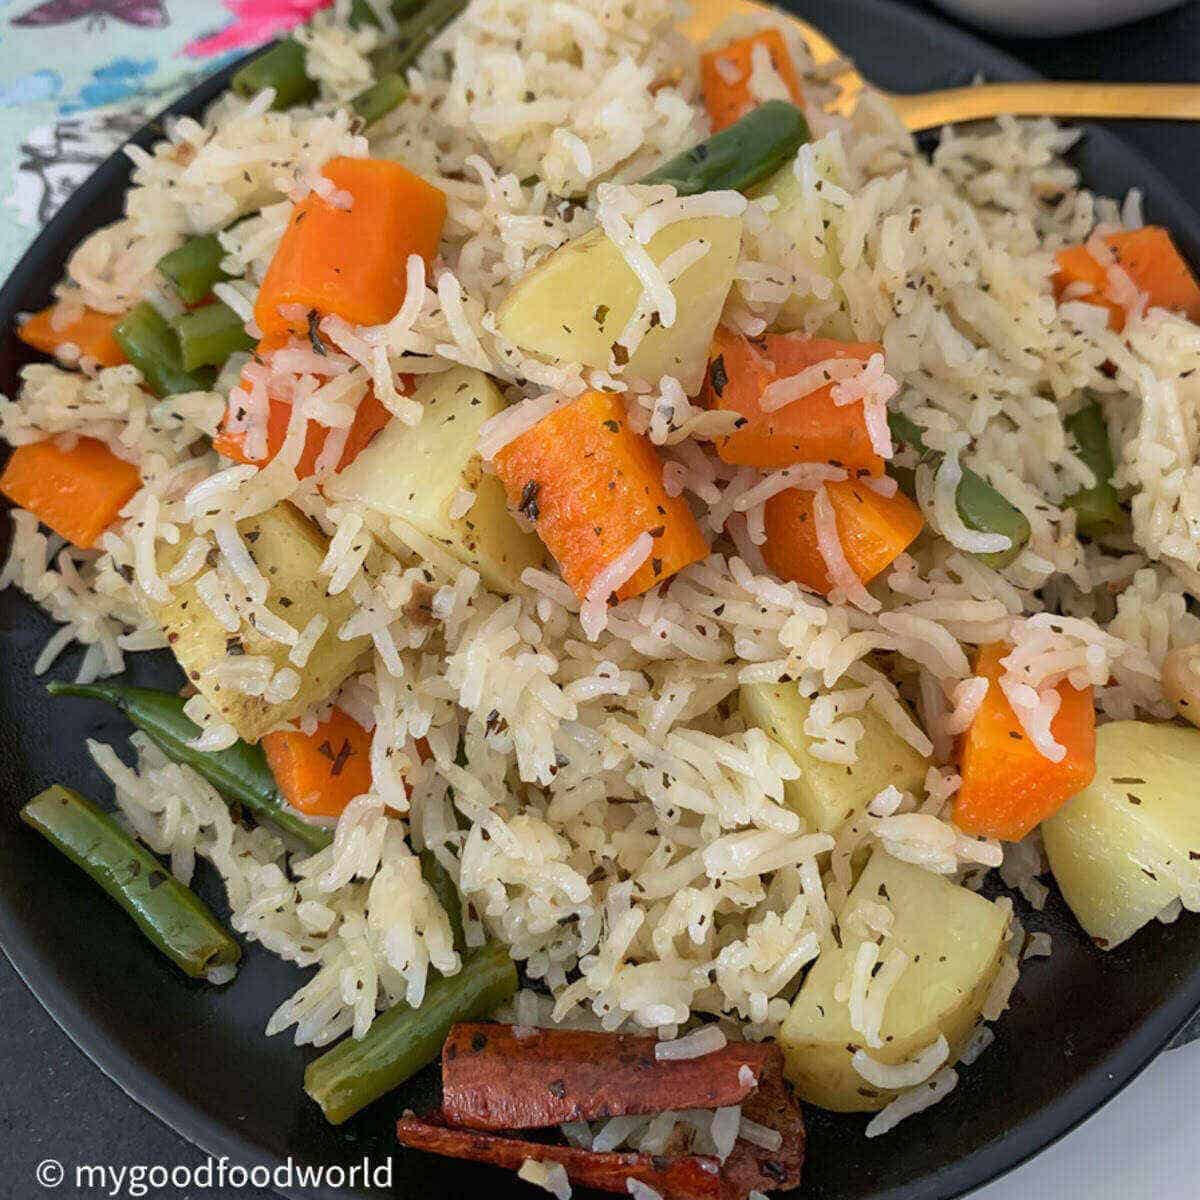 Veg pulao with carrot, beans and potatoes served in a black plate.